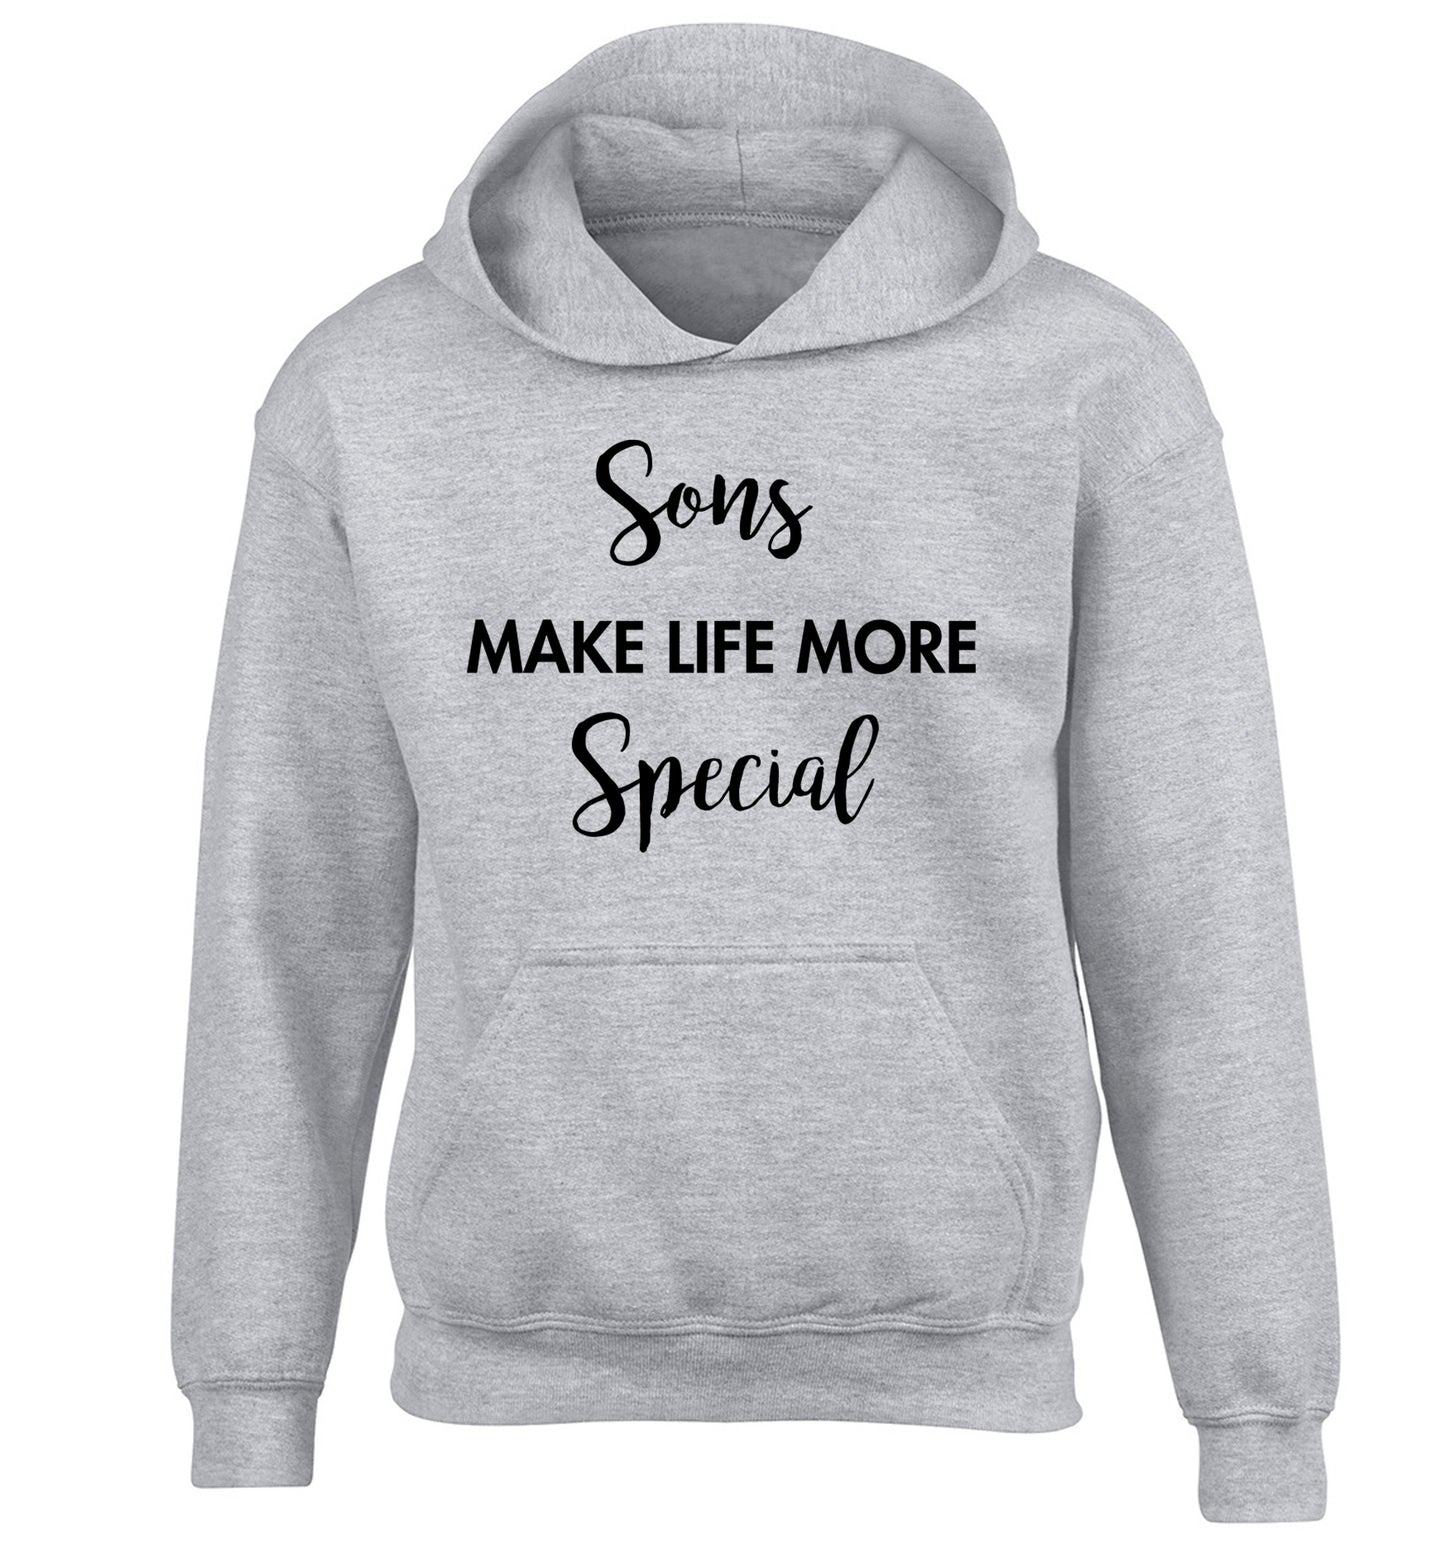 Daughters make life more special children's grey hoodie 12-14 Years